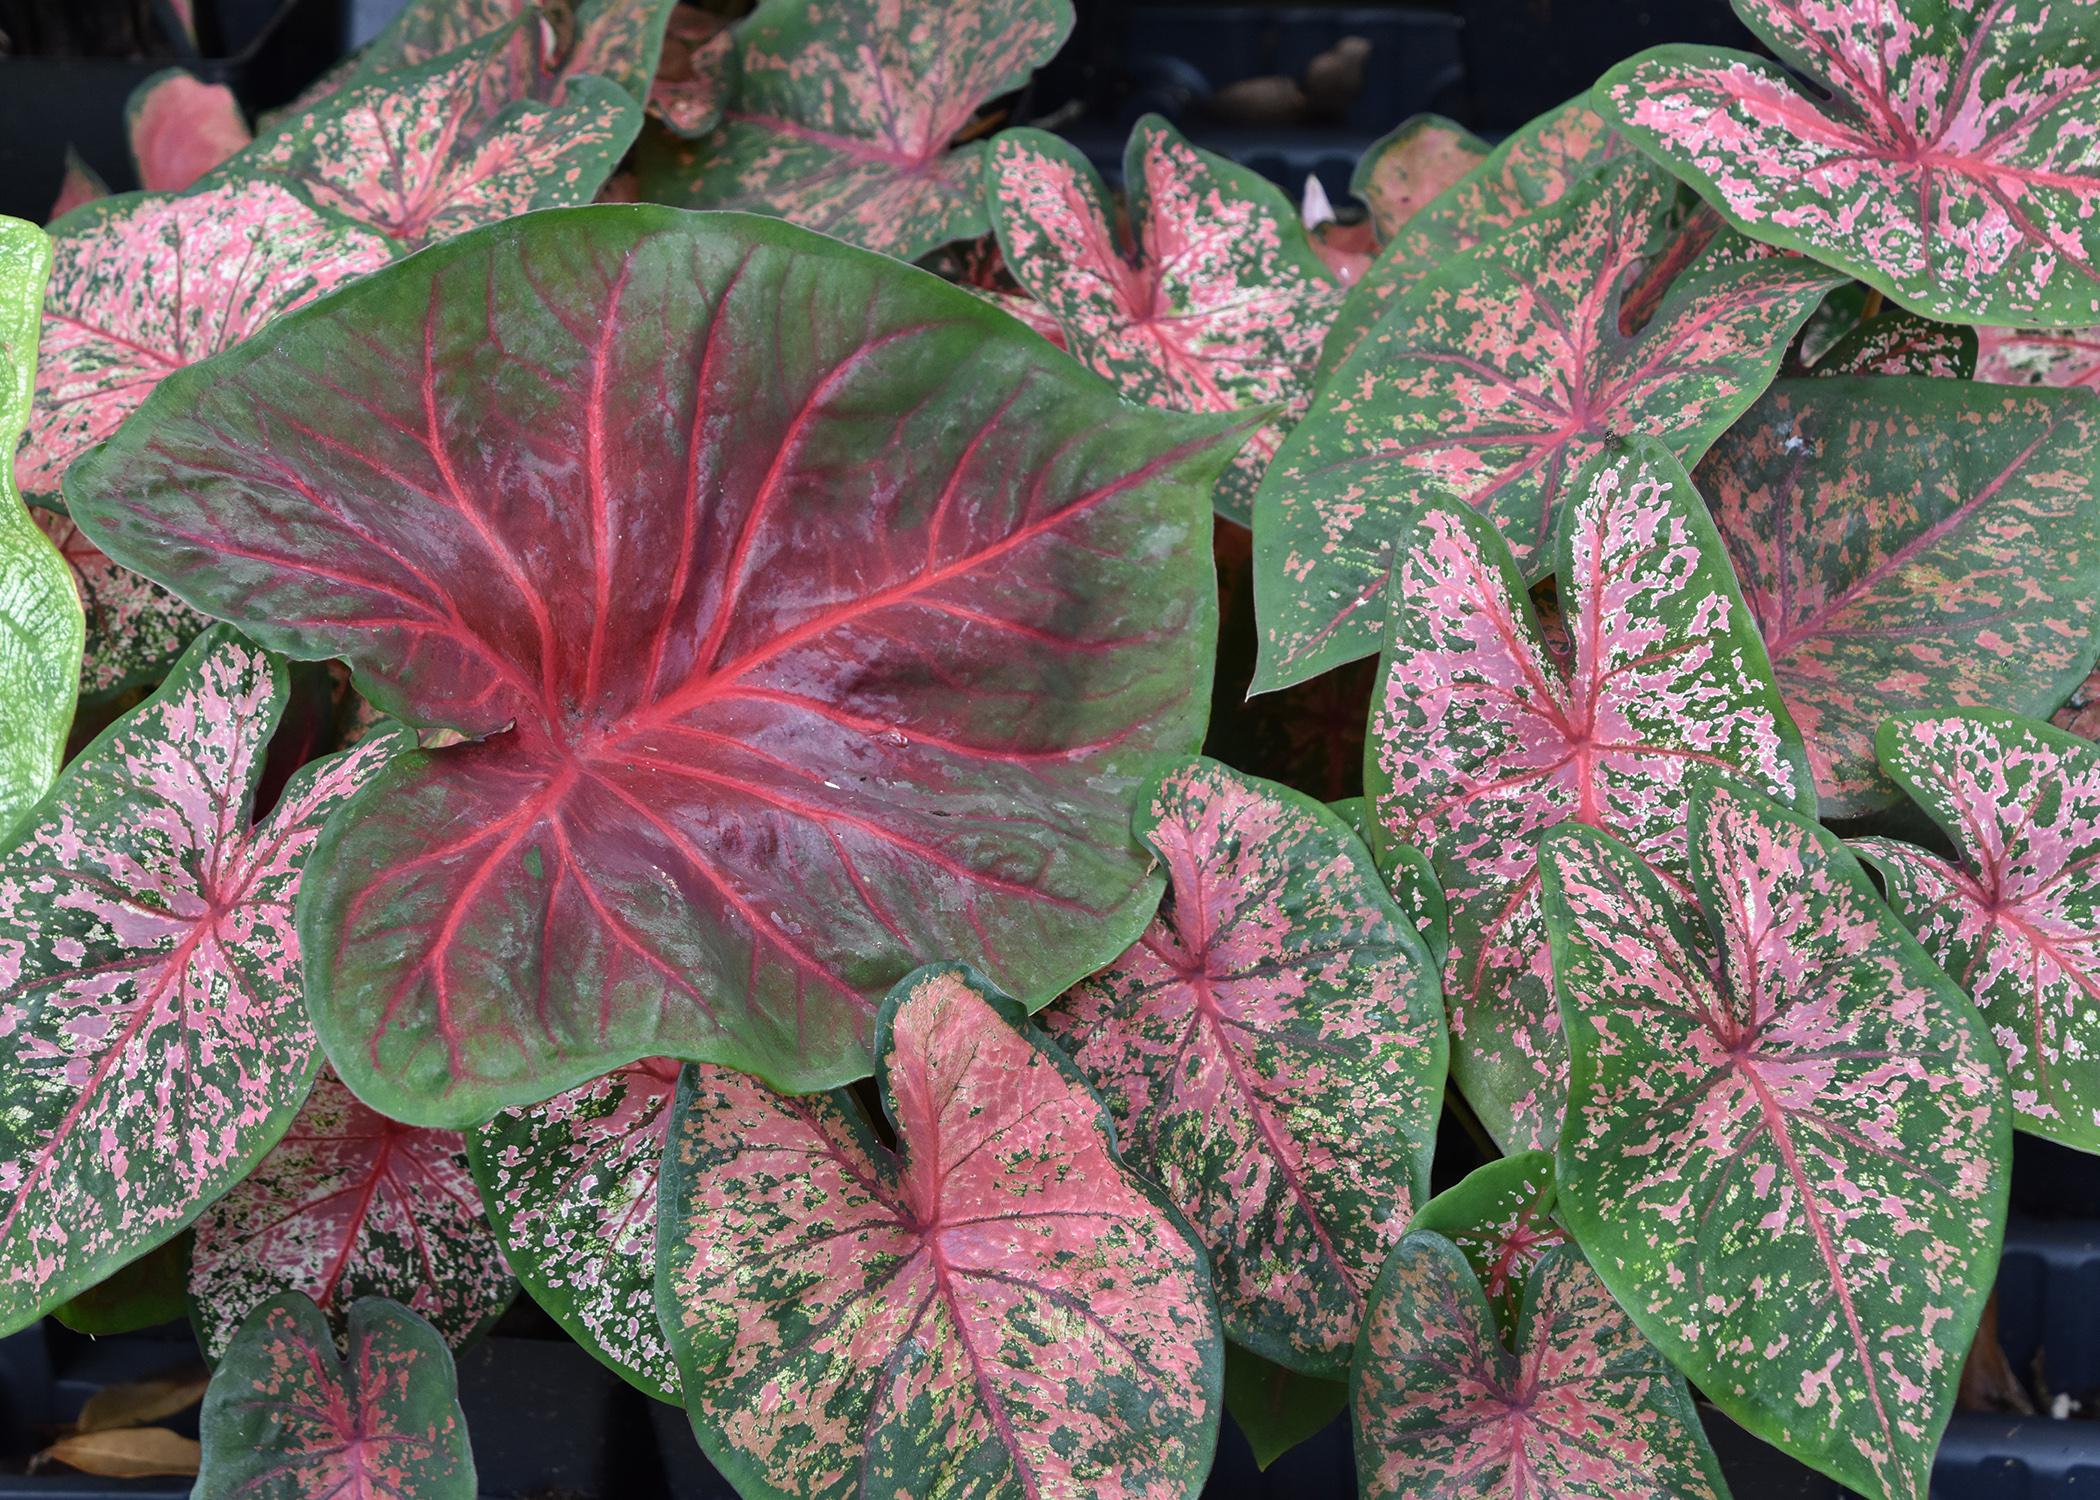 When kept consistently watered, caladiums are colorful additions to the landscape even during the hottest periods of summer. (Photo by MSU Extension Service/Gary Bachman)